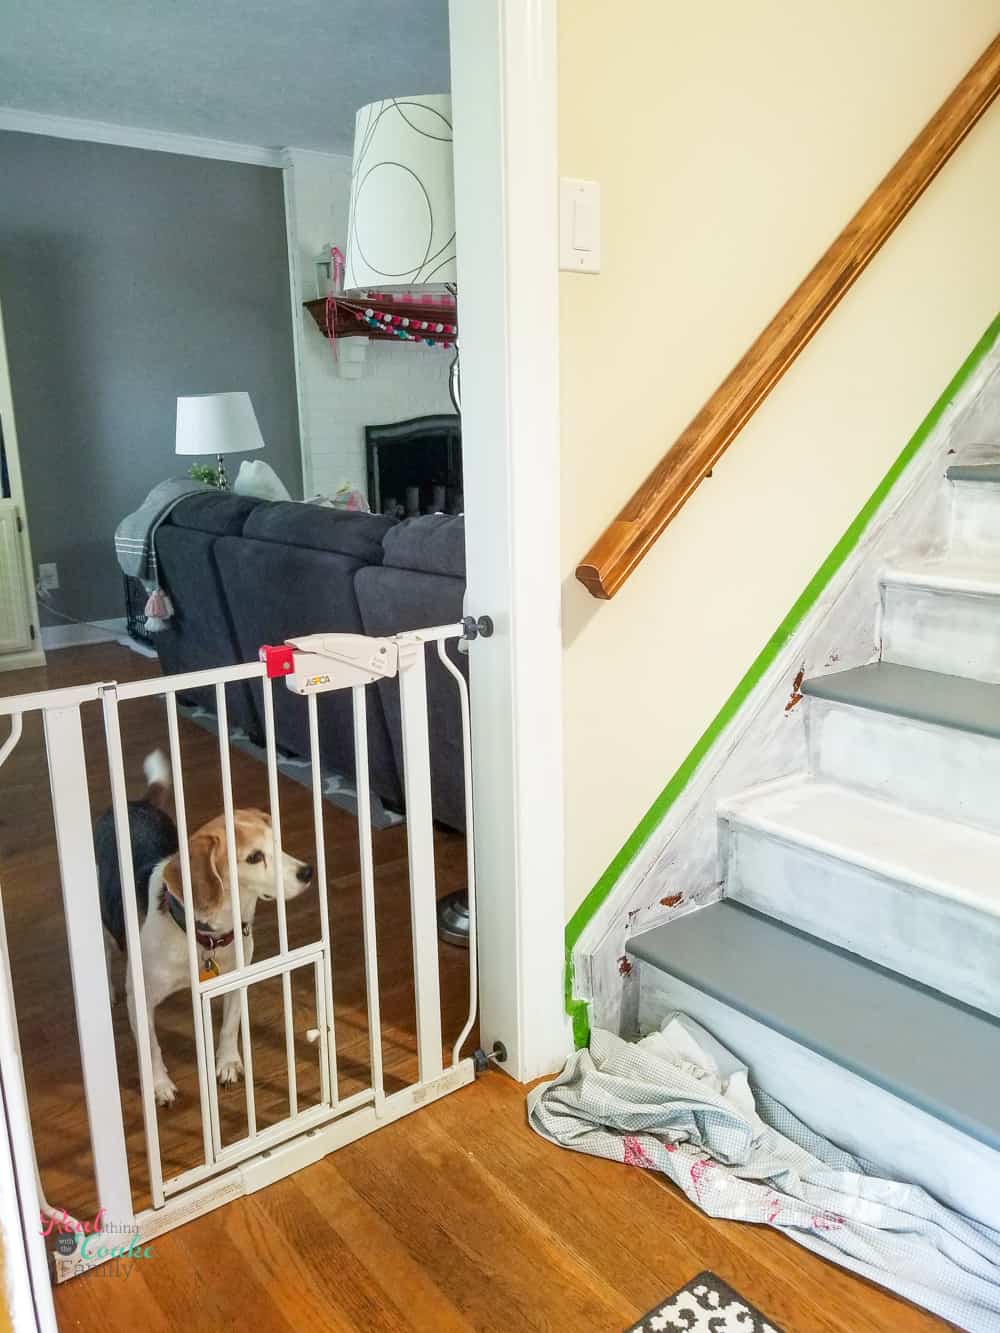 blocking dog from wet paint on stairs